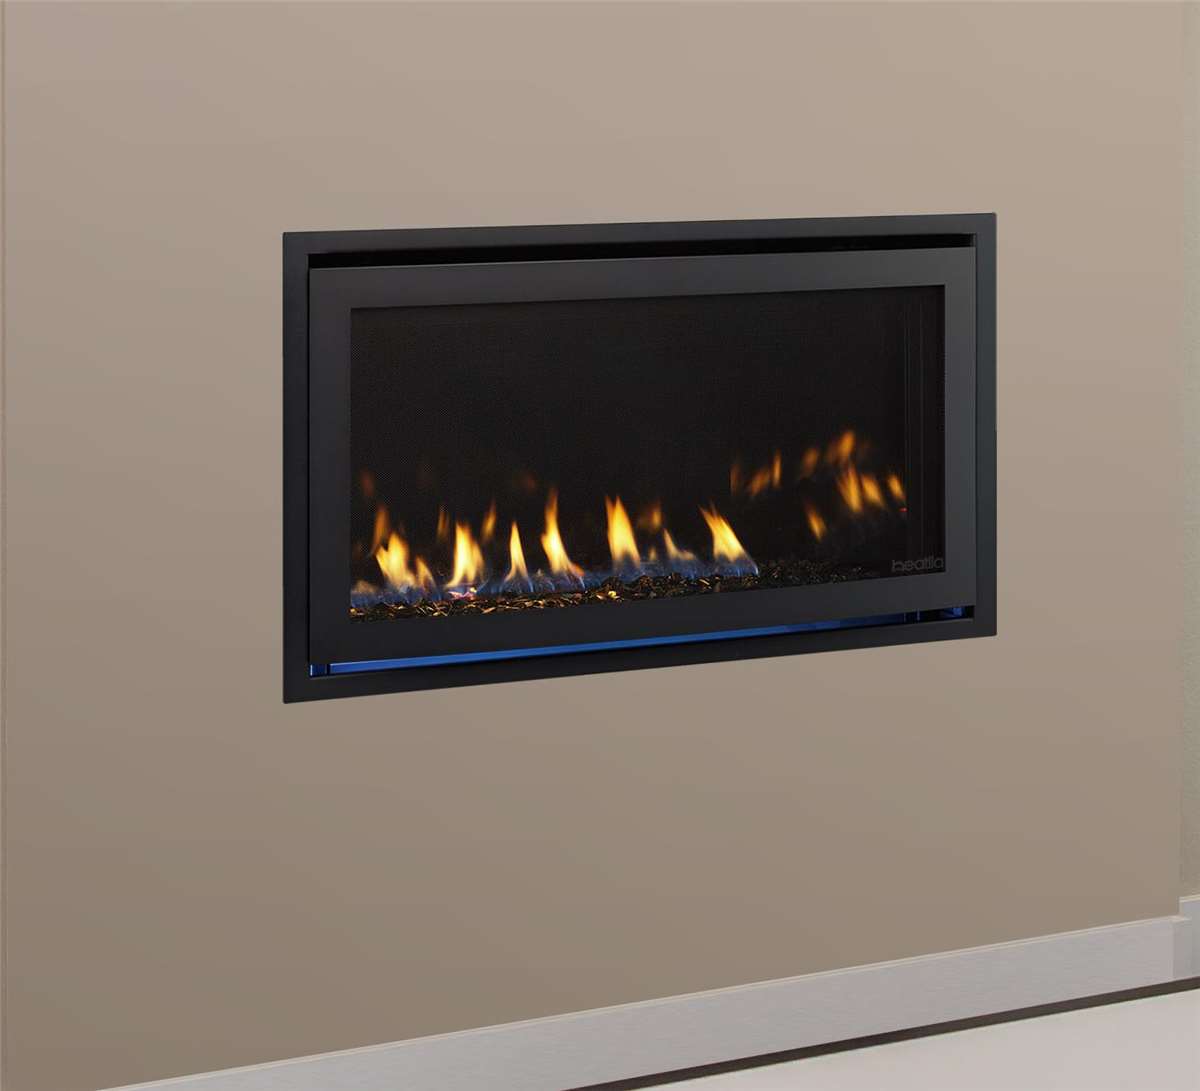 Heatilator Rave 32" direct vent gas fireplace with Illusion black front, reflective panels, and accent lights.